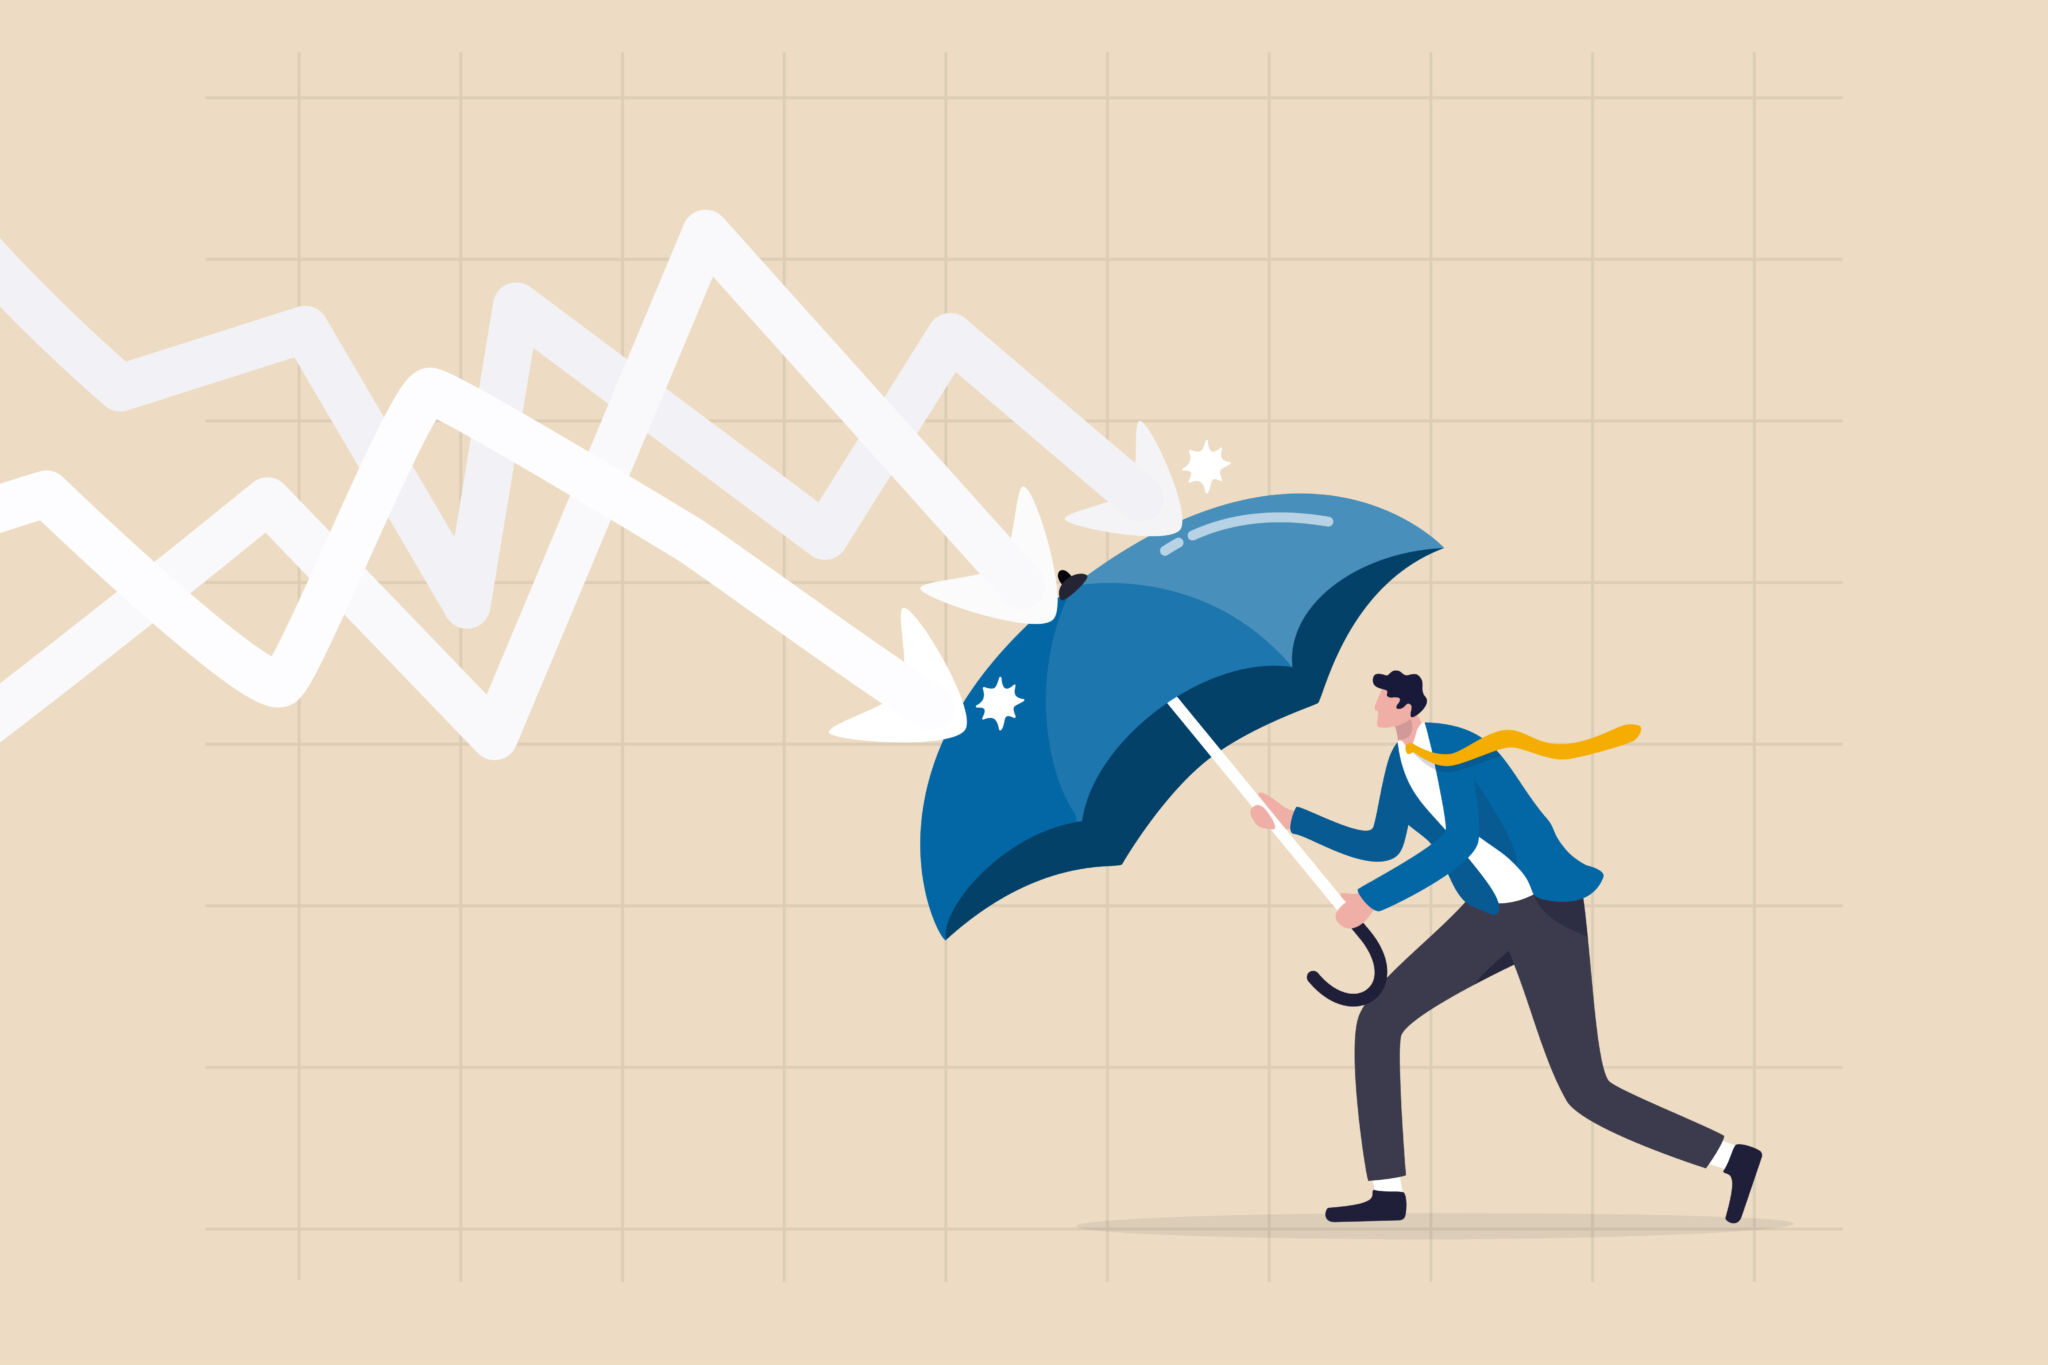 Protection or defense in economy crisis, business resilient to survive economic challenges, businessman holding umbrella to cover and protect from downturn arrow.